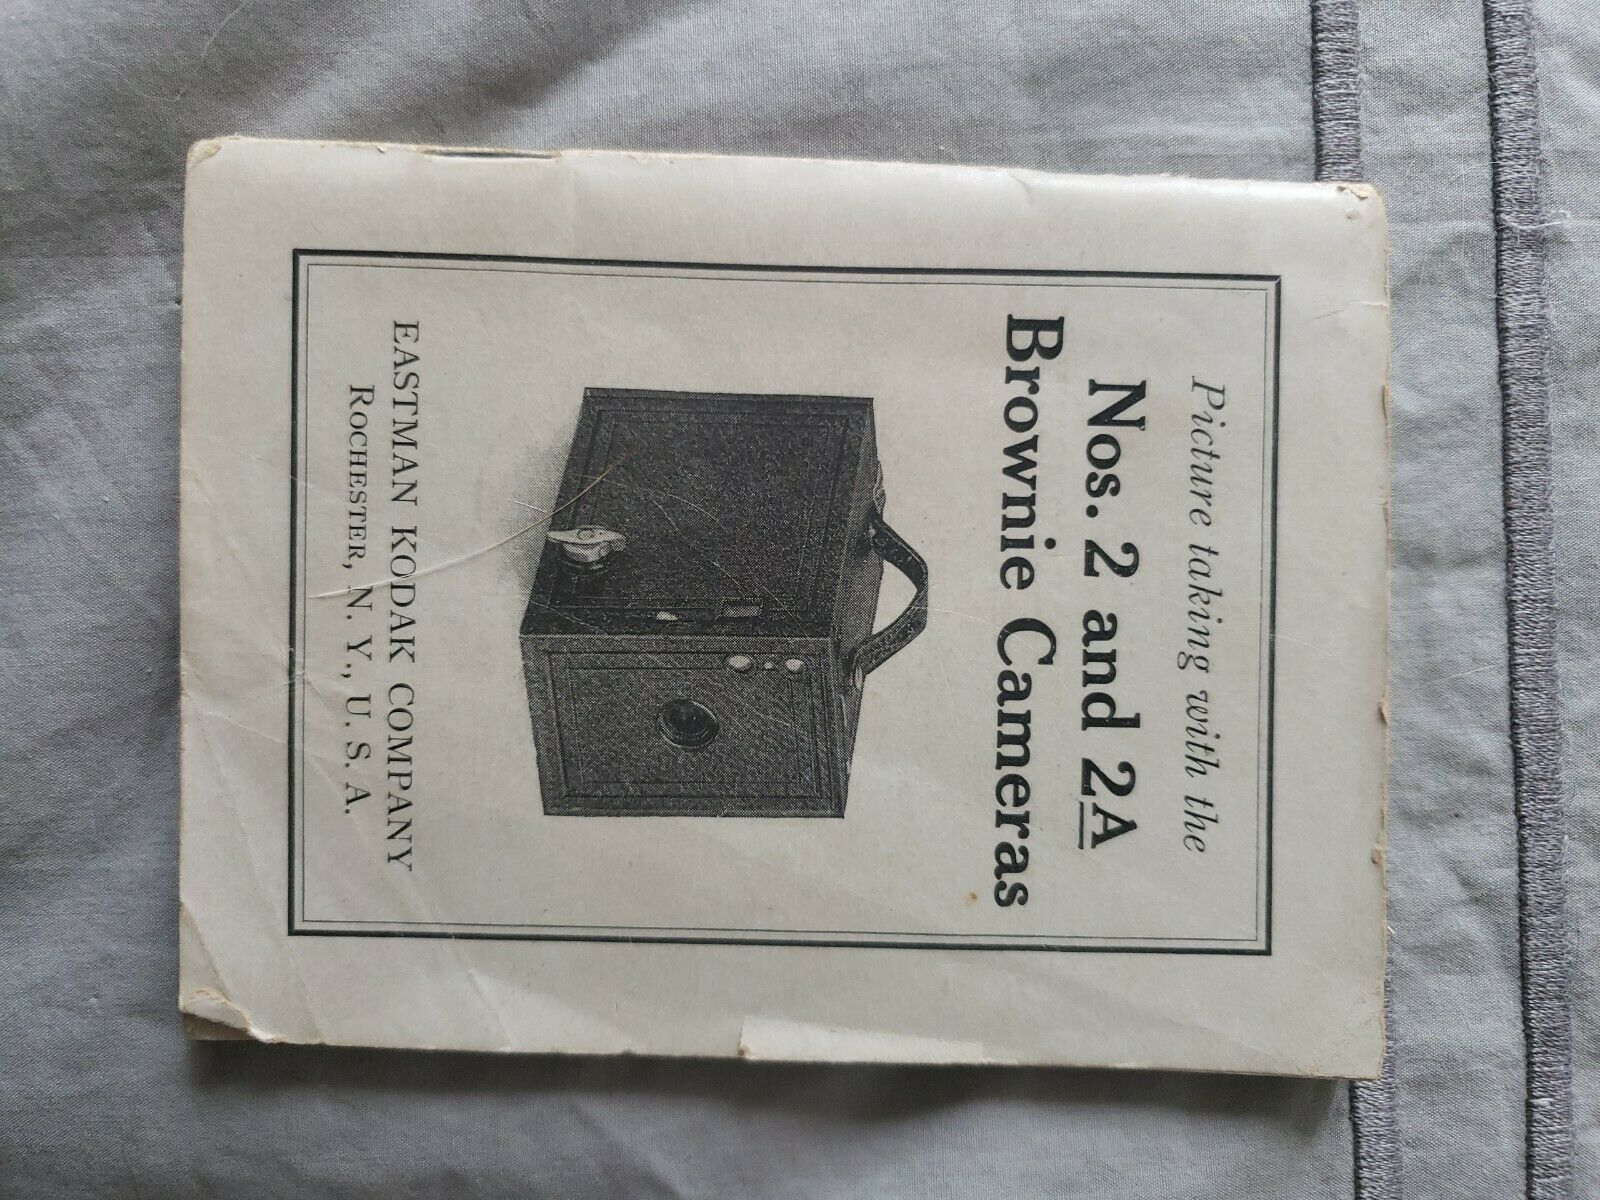 Eastman Kodak Company Instruction Manual For Brownie Cameras No 2 And 2a